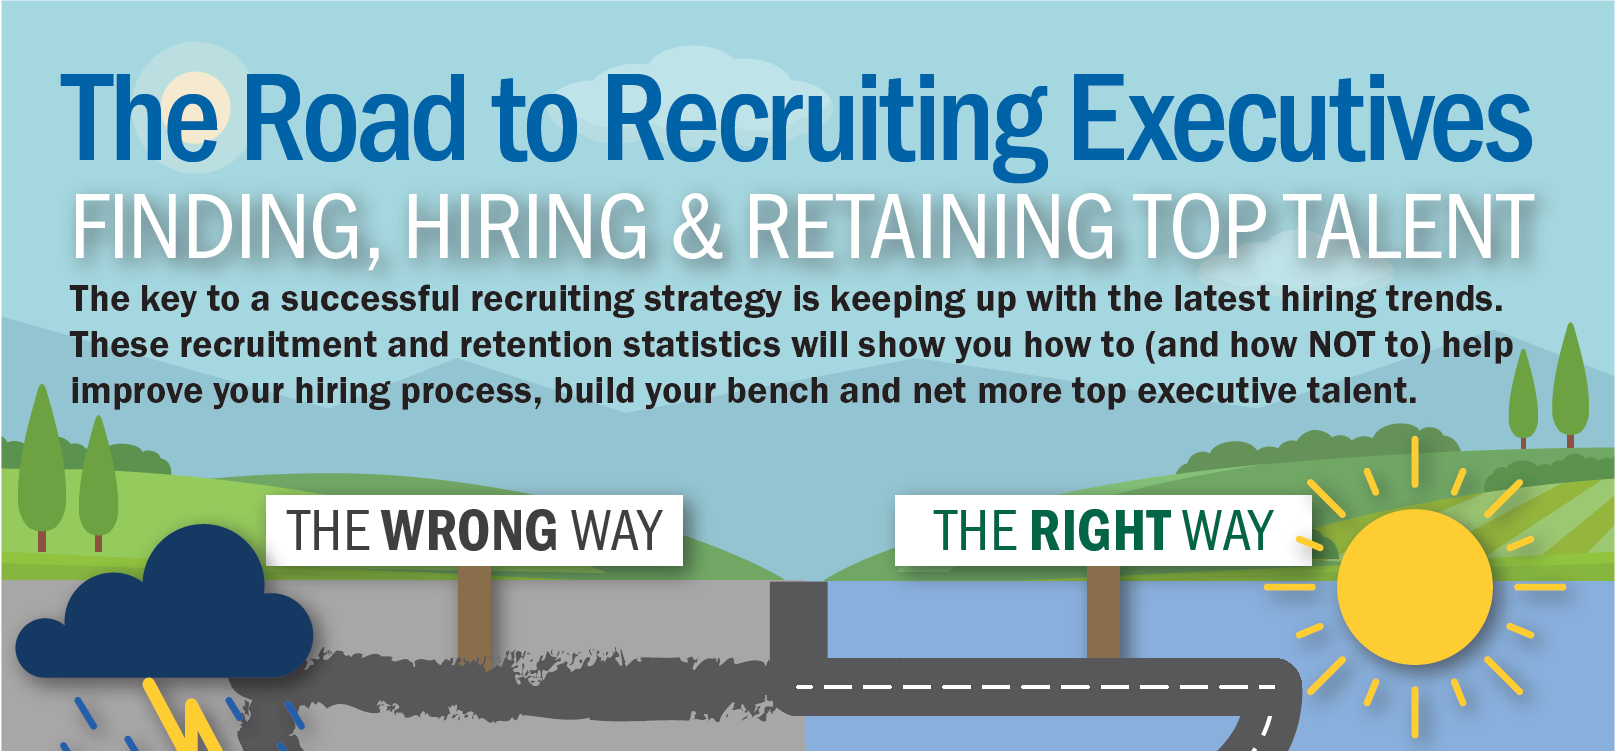 The Road to Recruiting Executives